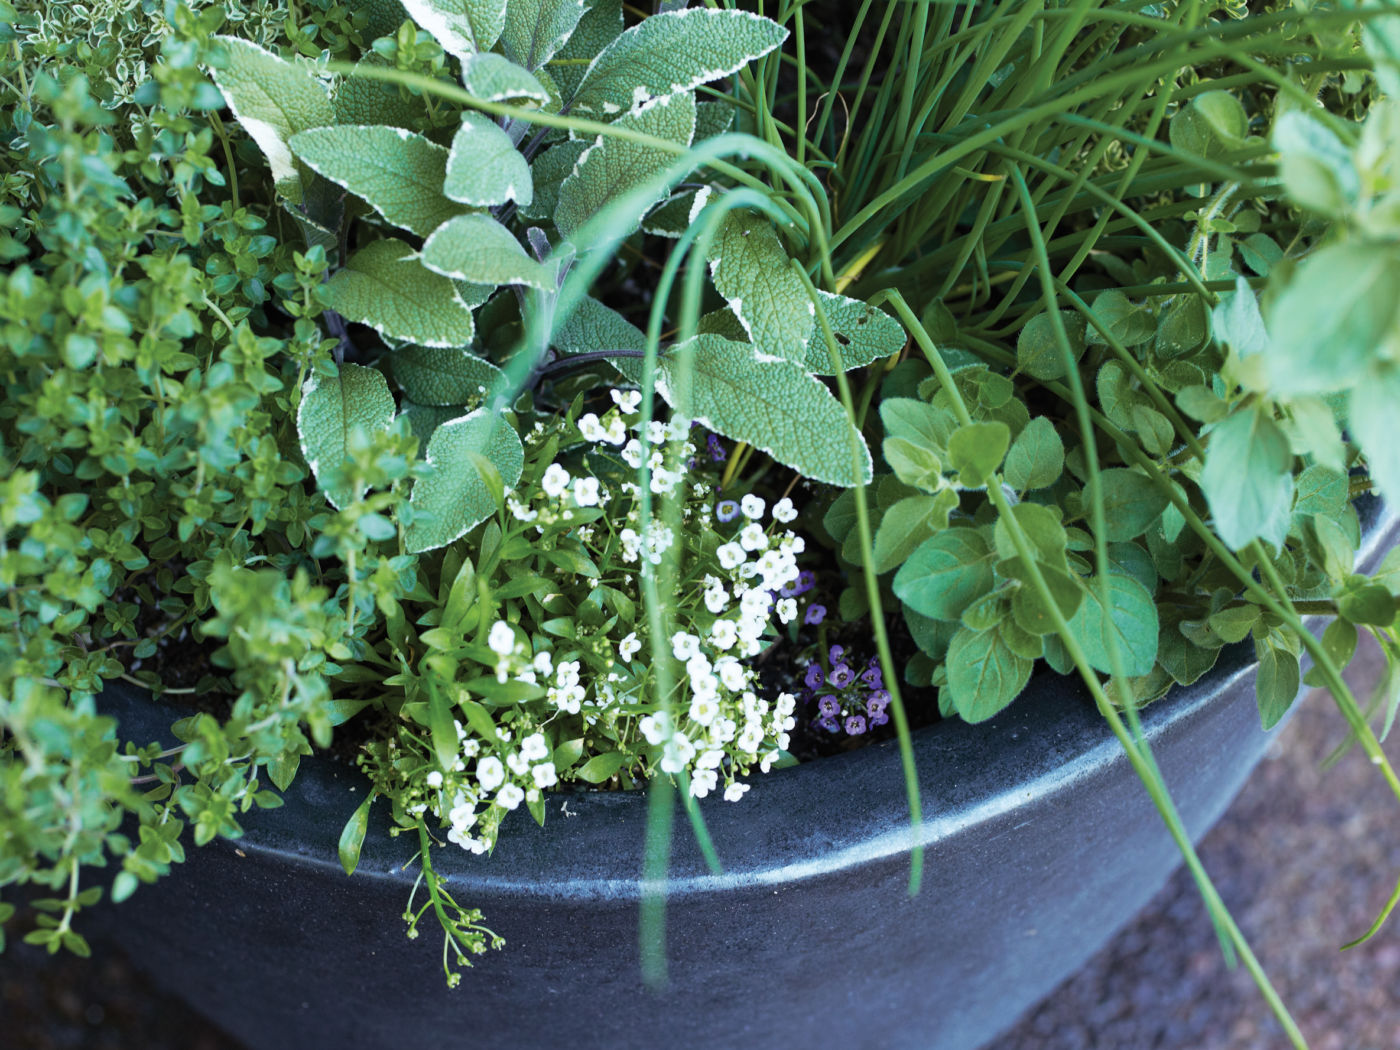 French and English thyme, Tricolor sage, garlic chives, Greek oregano, and white- and purple-flowered pollinator-attracting alyssum cascade over the edges of this dedicated herb container